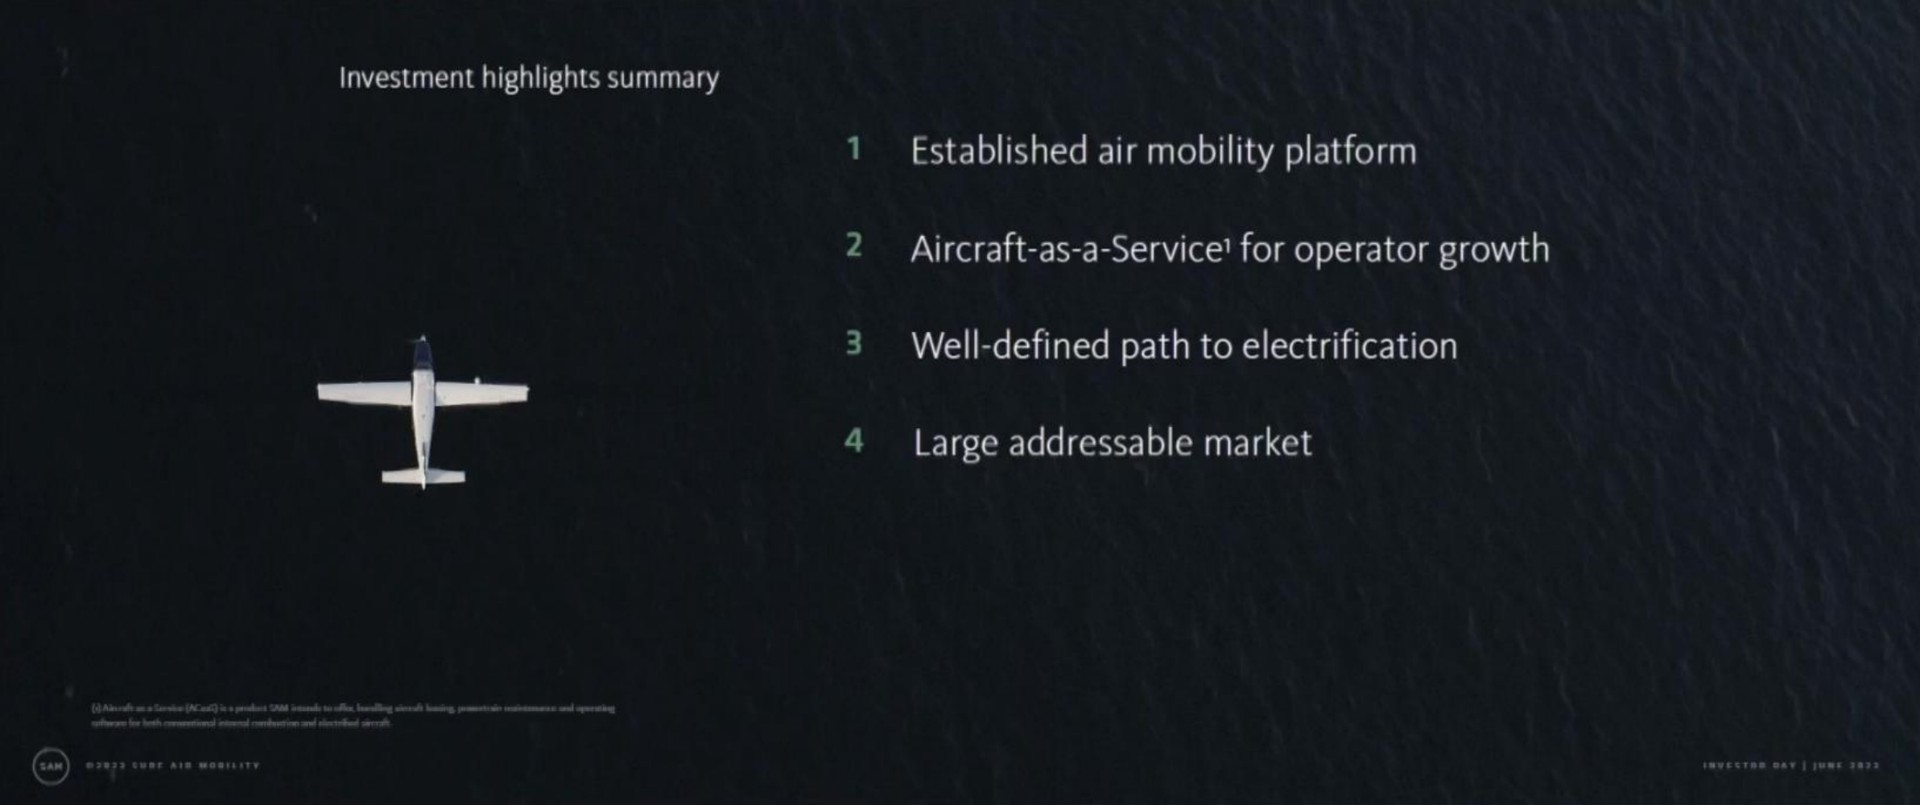 be established air mobility platform aircraft as a service for operator growth well defined path to electrification large market | Surf Air